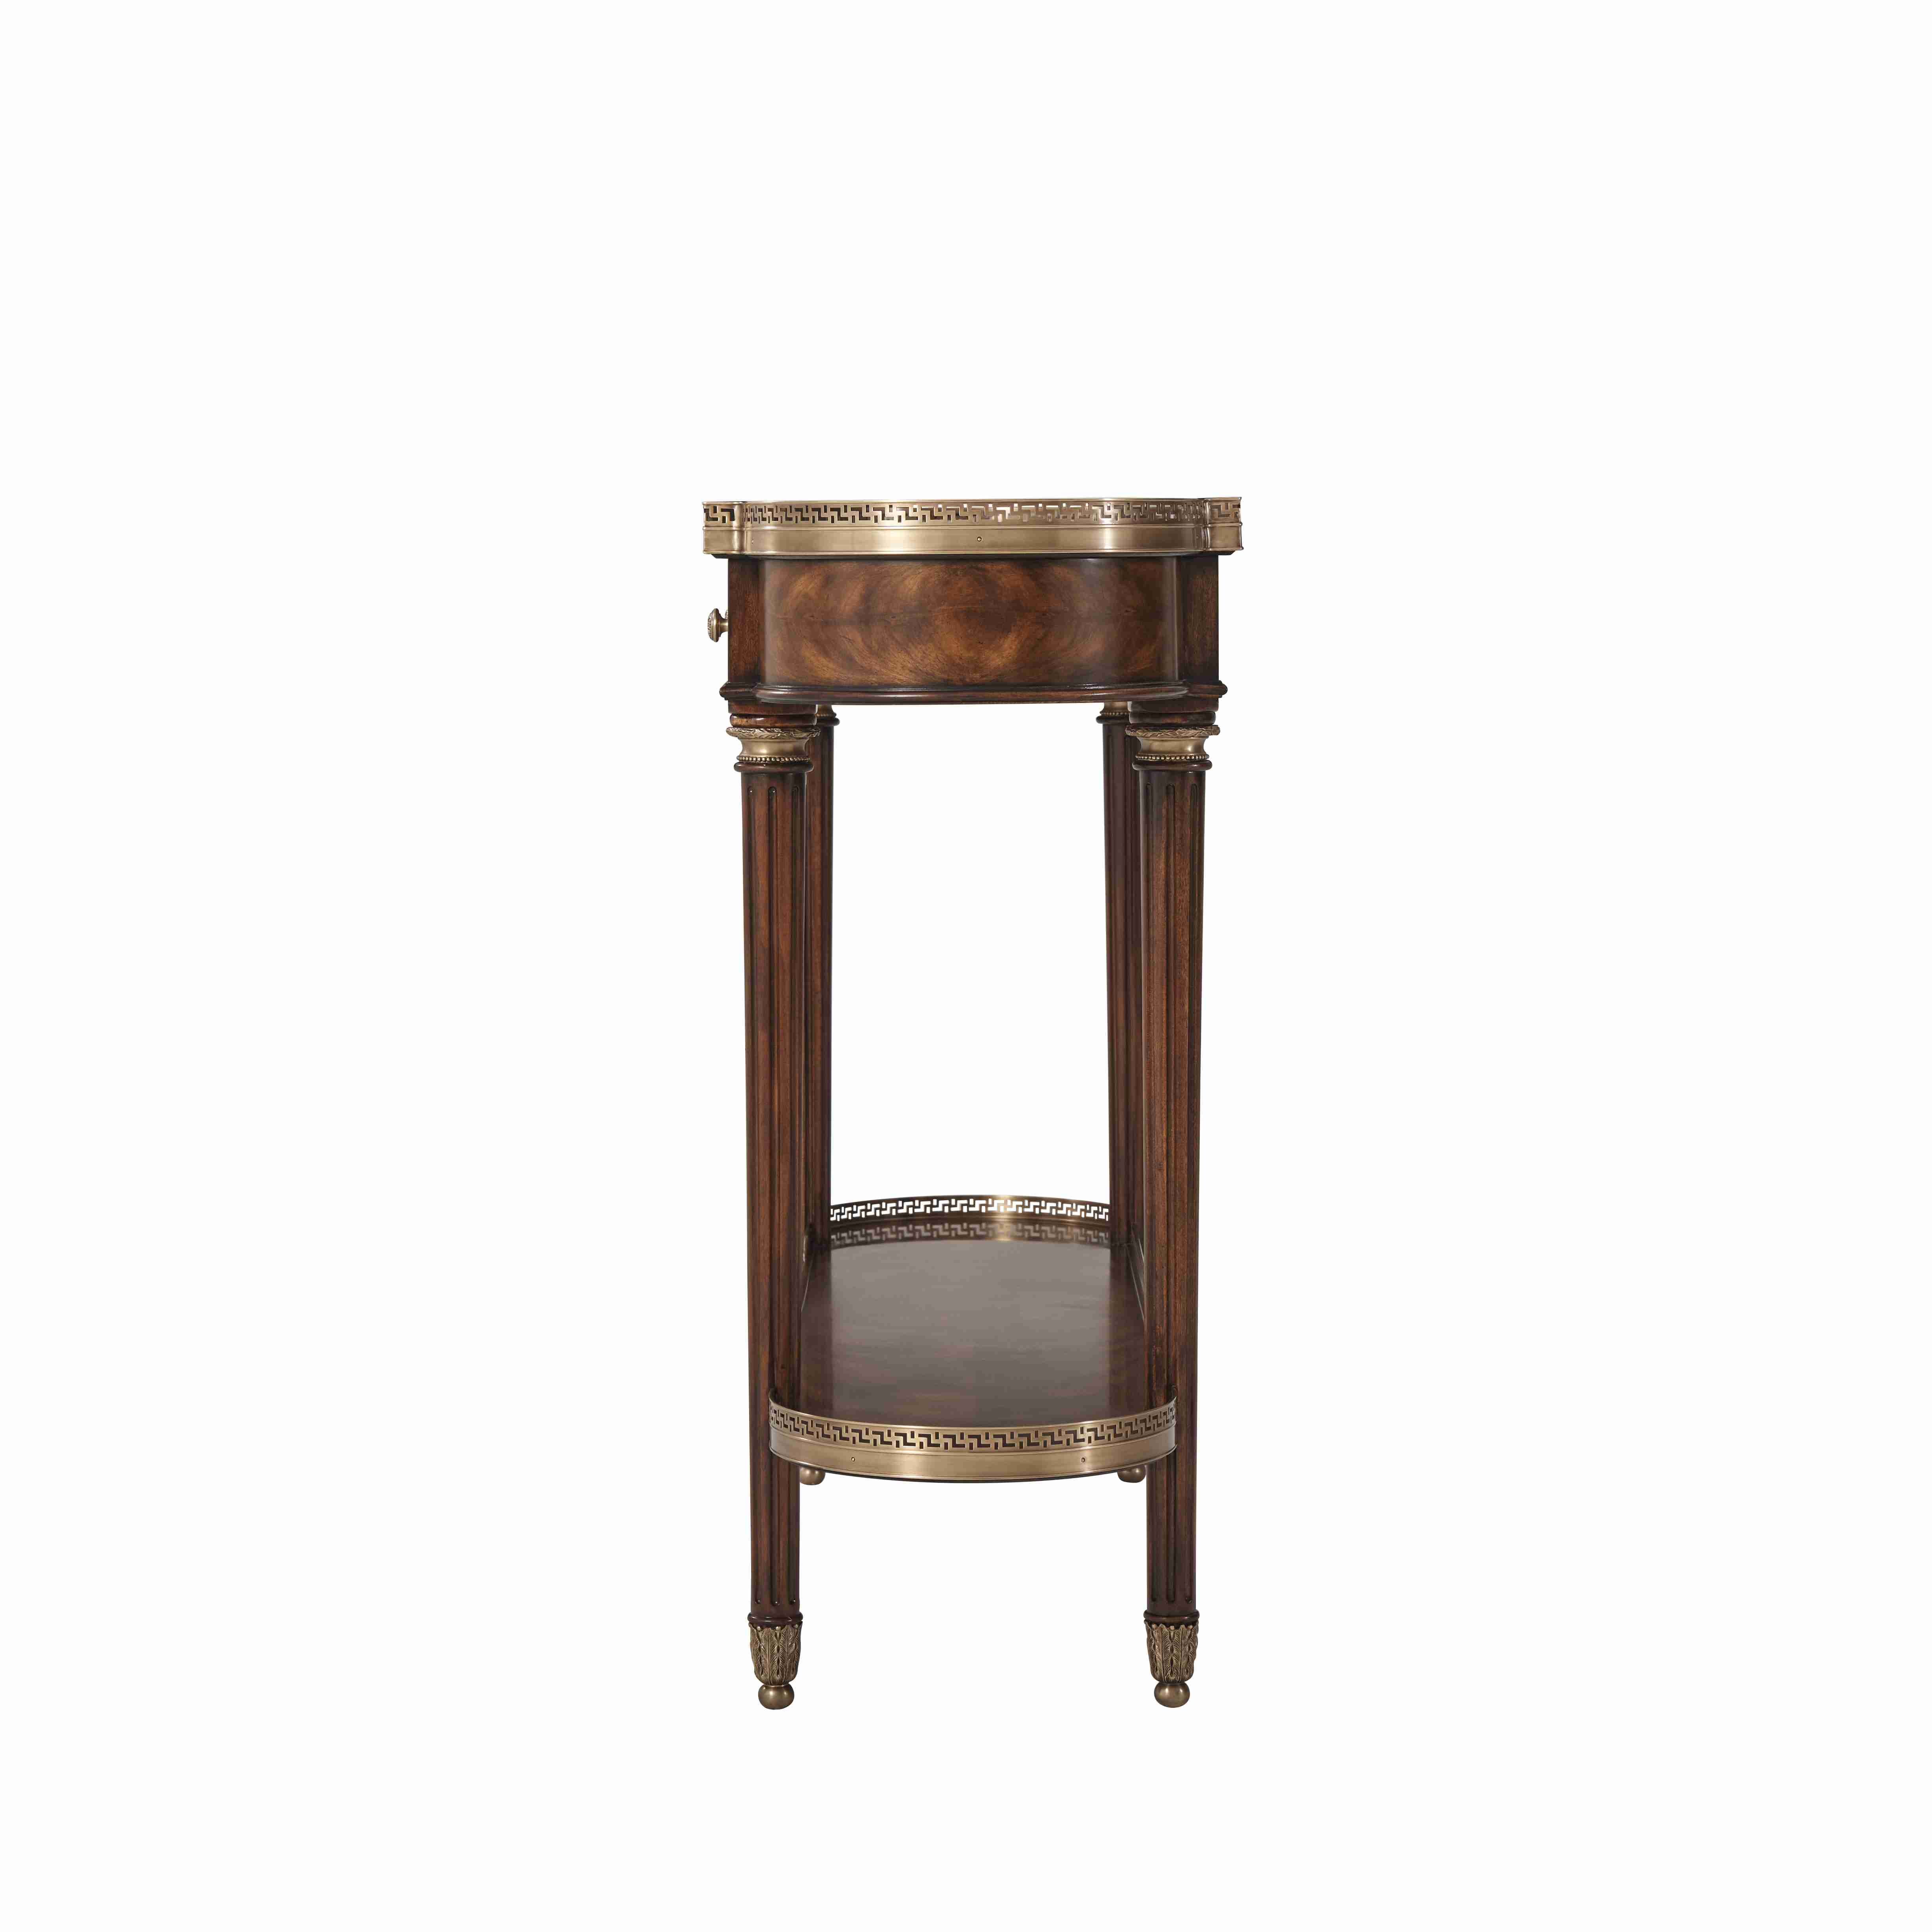 THE ROUNDED CONSOLE TABLE